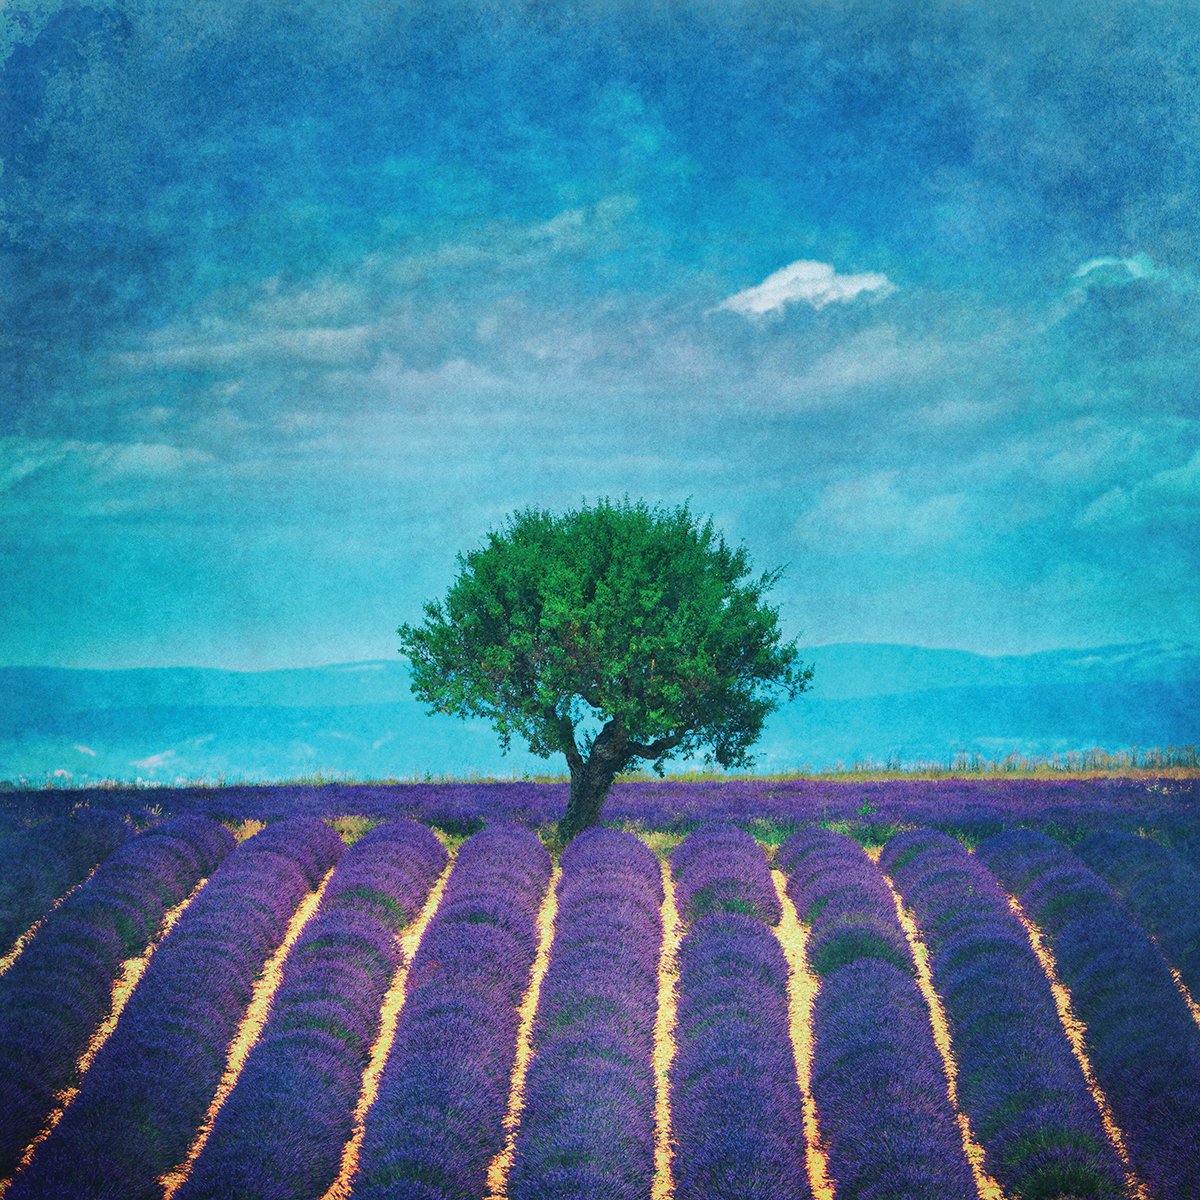 Lavender field and a lonely tree by Peter Zelei